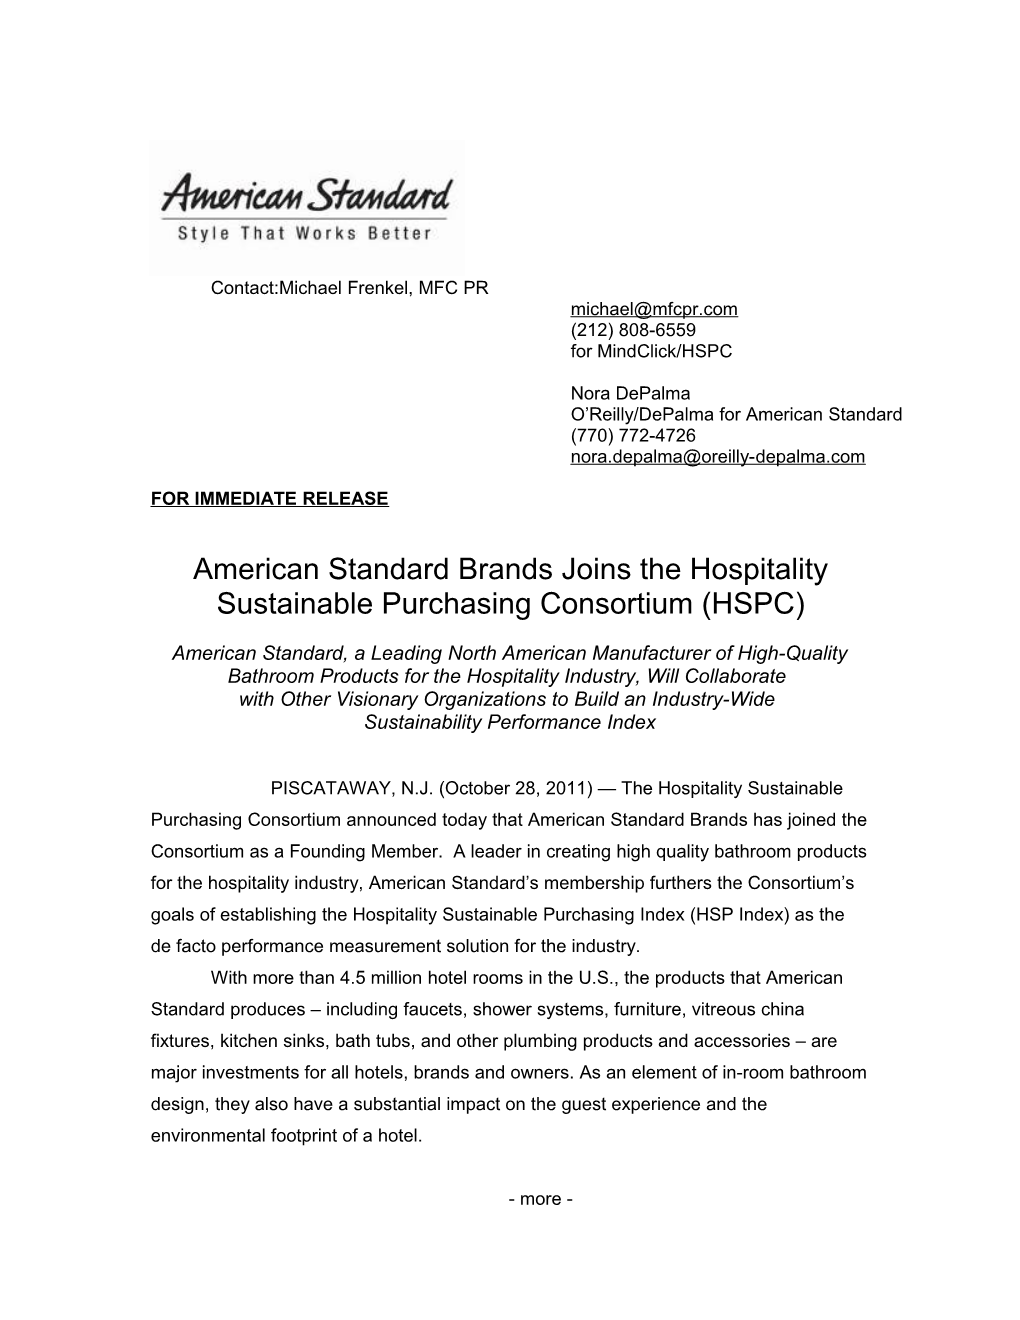 American Standard Brands Joins the Hospitality Sustainable Purchasing Consortium (HSPC)3-3-3